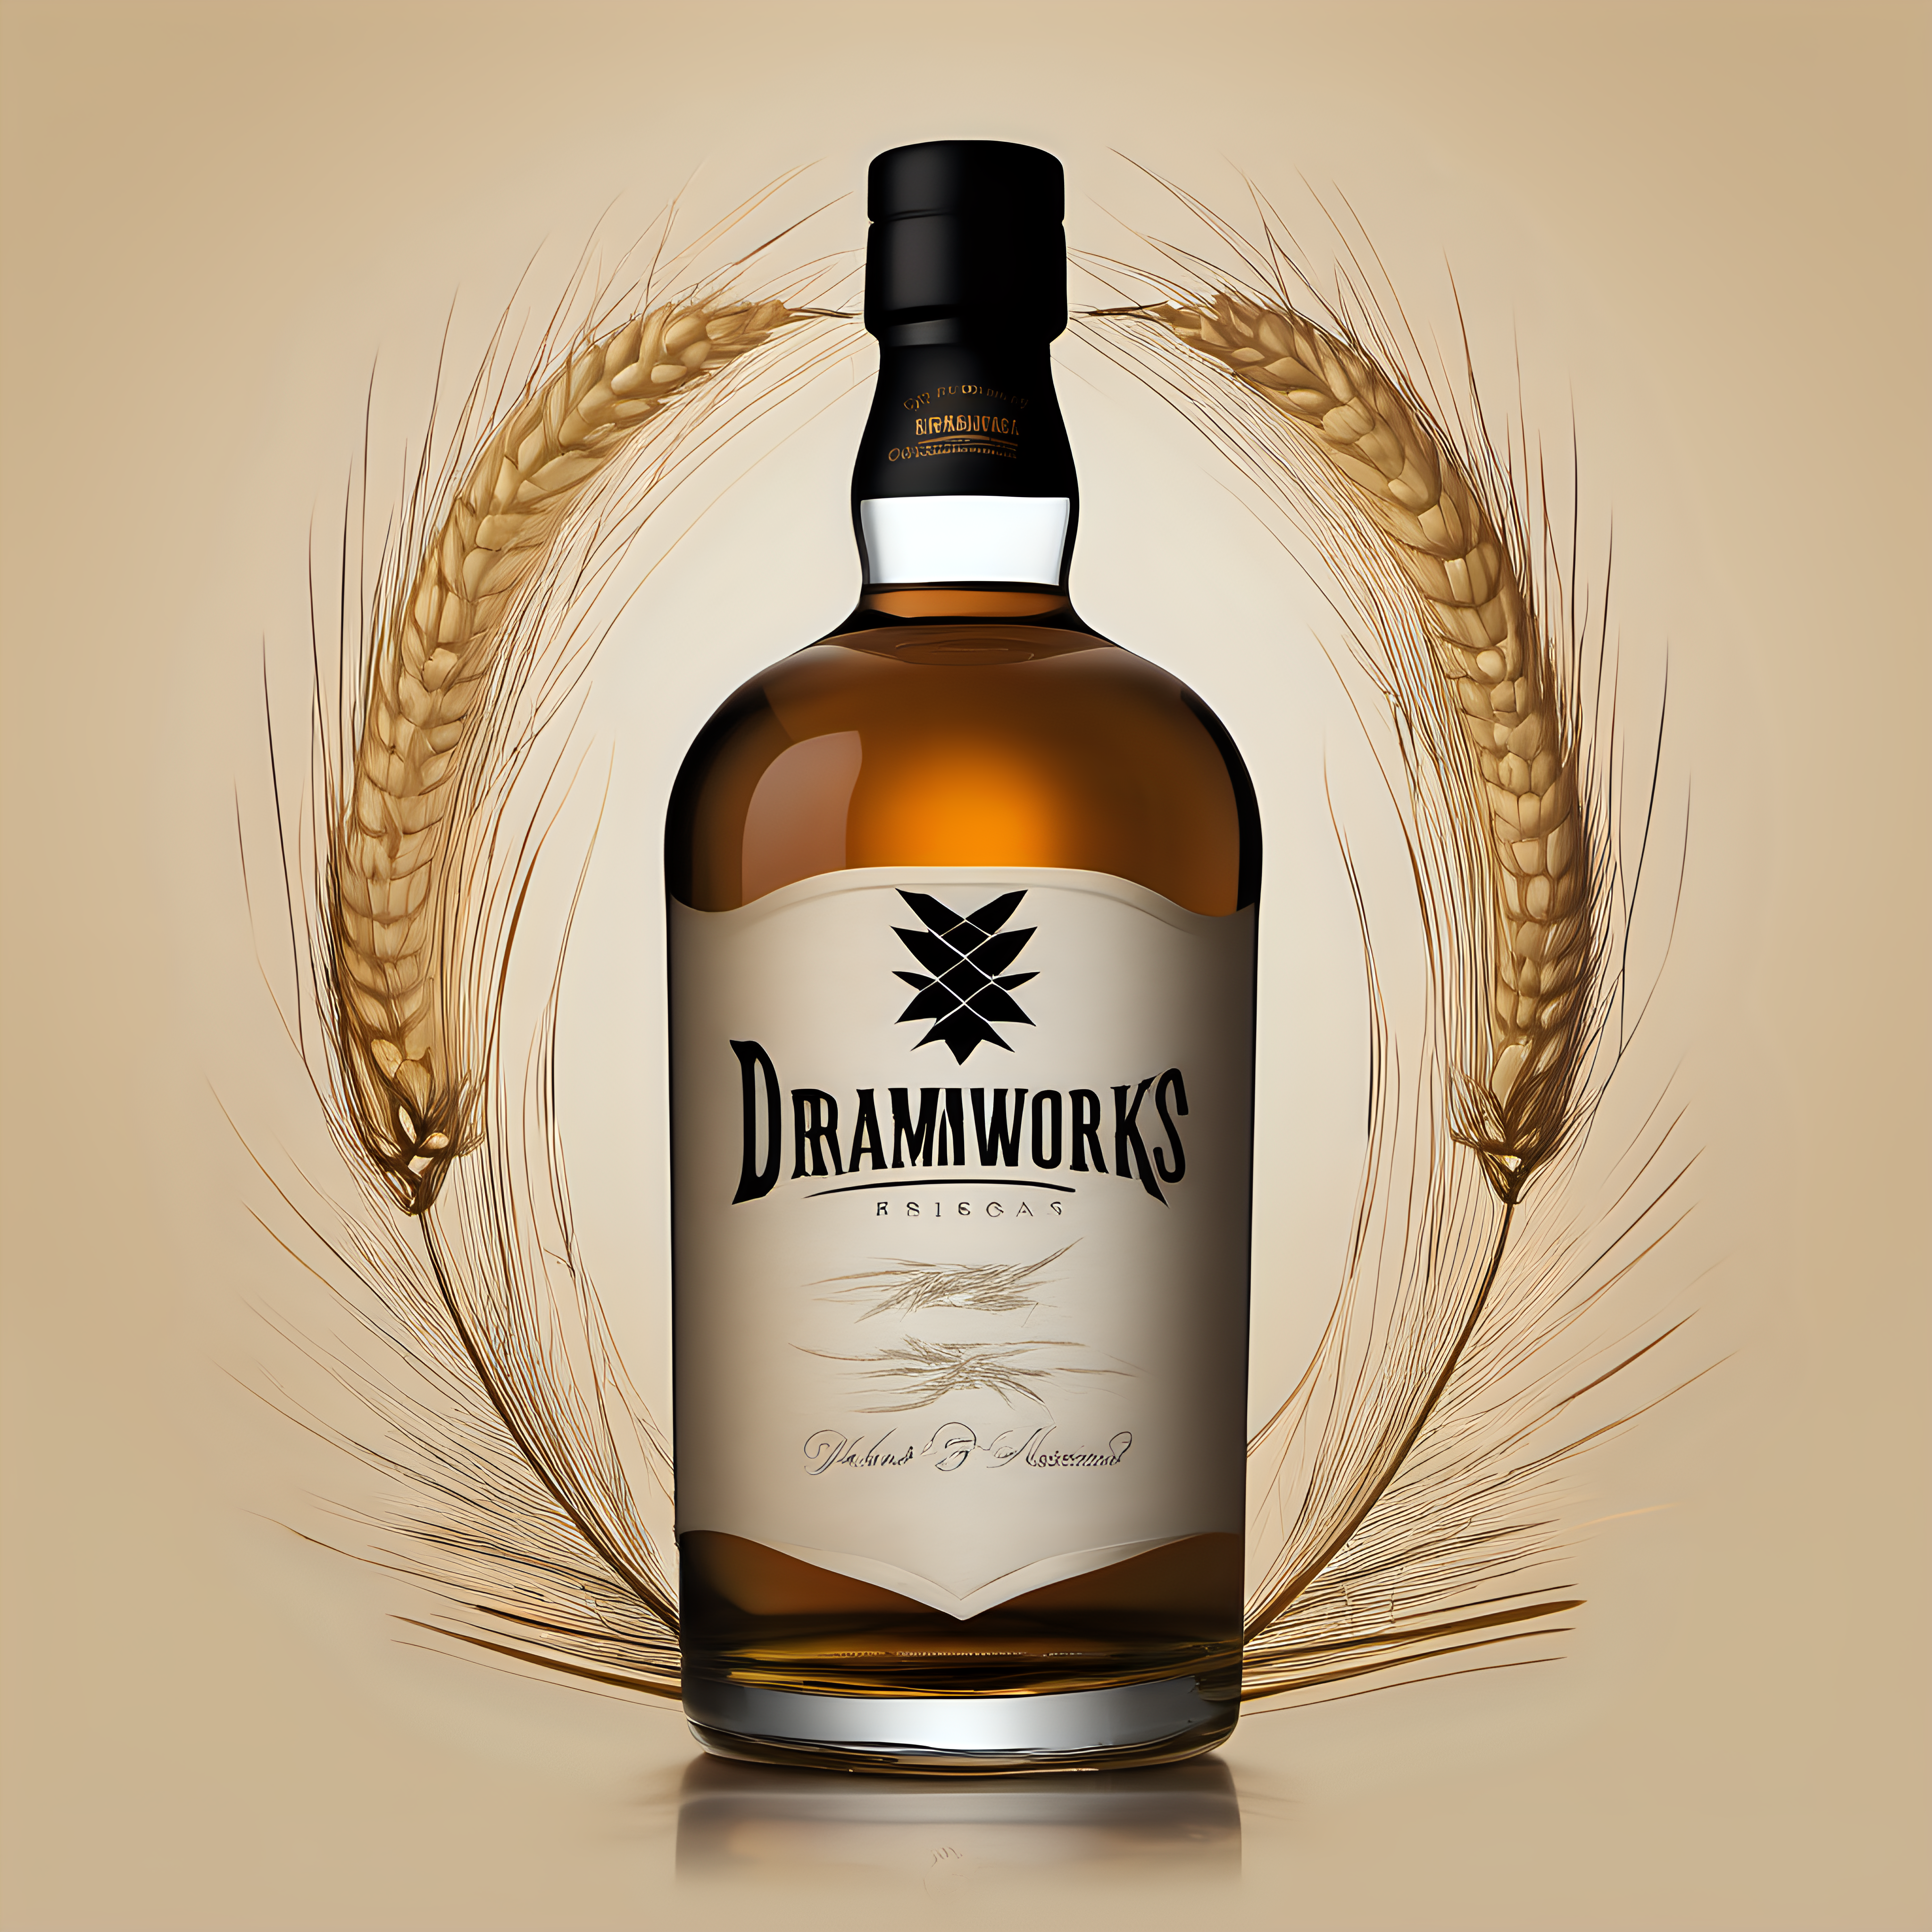 create a brand for a whisky company called "Dramworks" that looks modern and incorporates barley